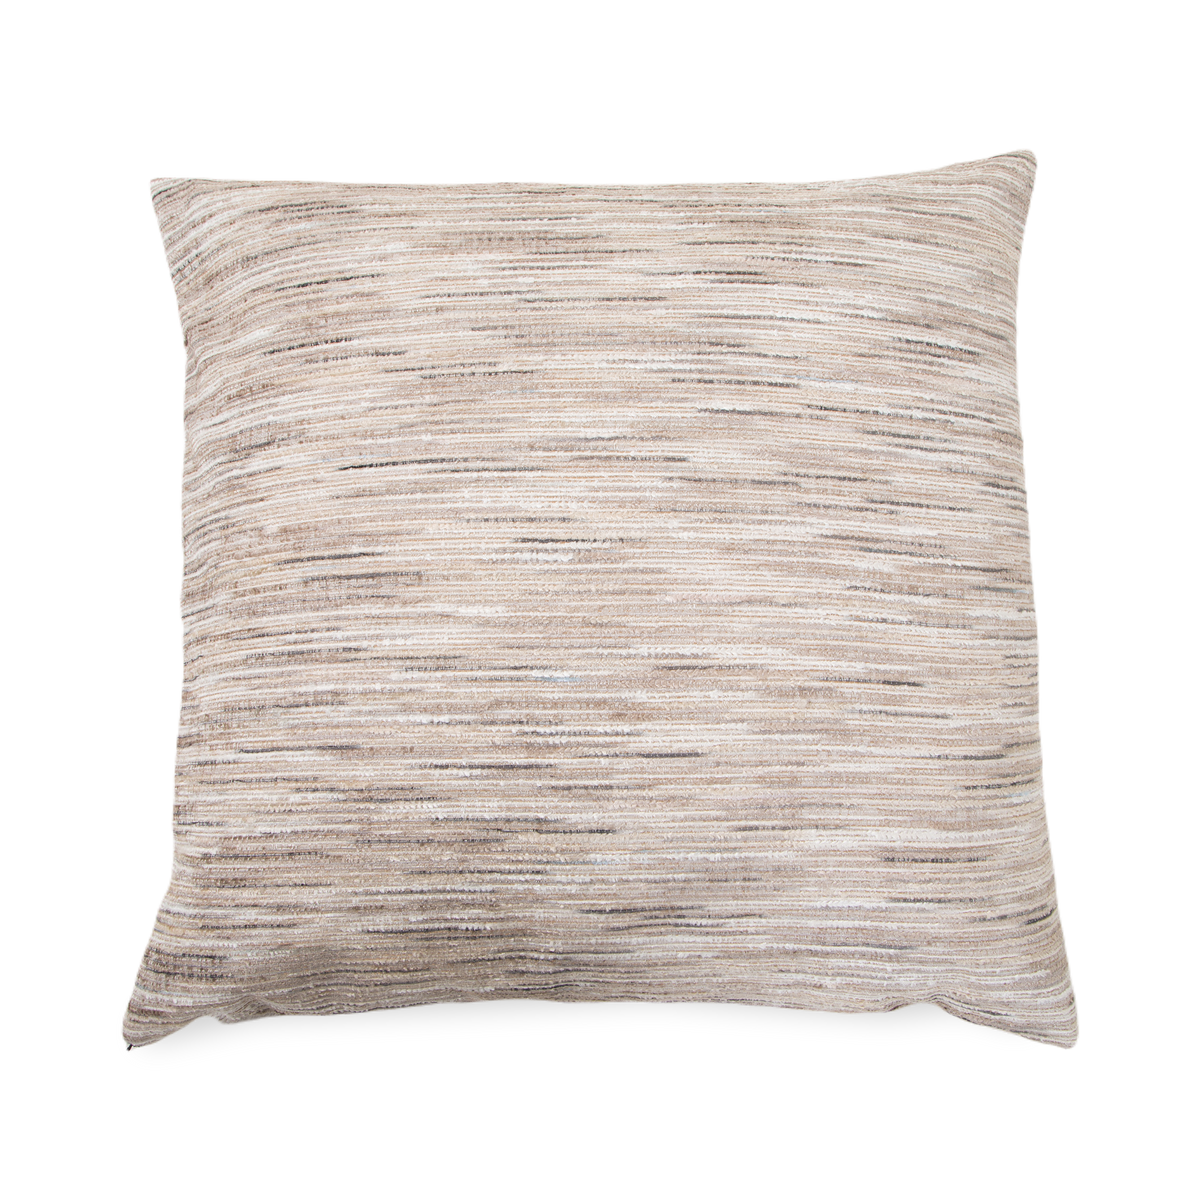 A touch of rustic design comes together in the Wabi Sabi Pillow which portrays a perfectly imperfect fabric.